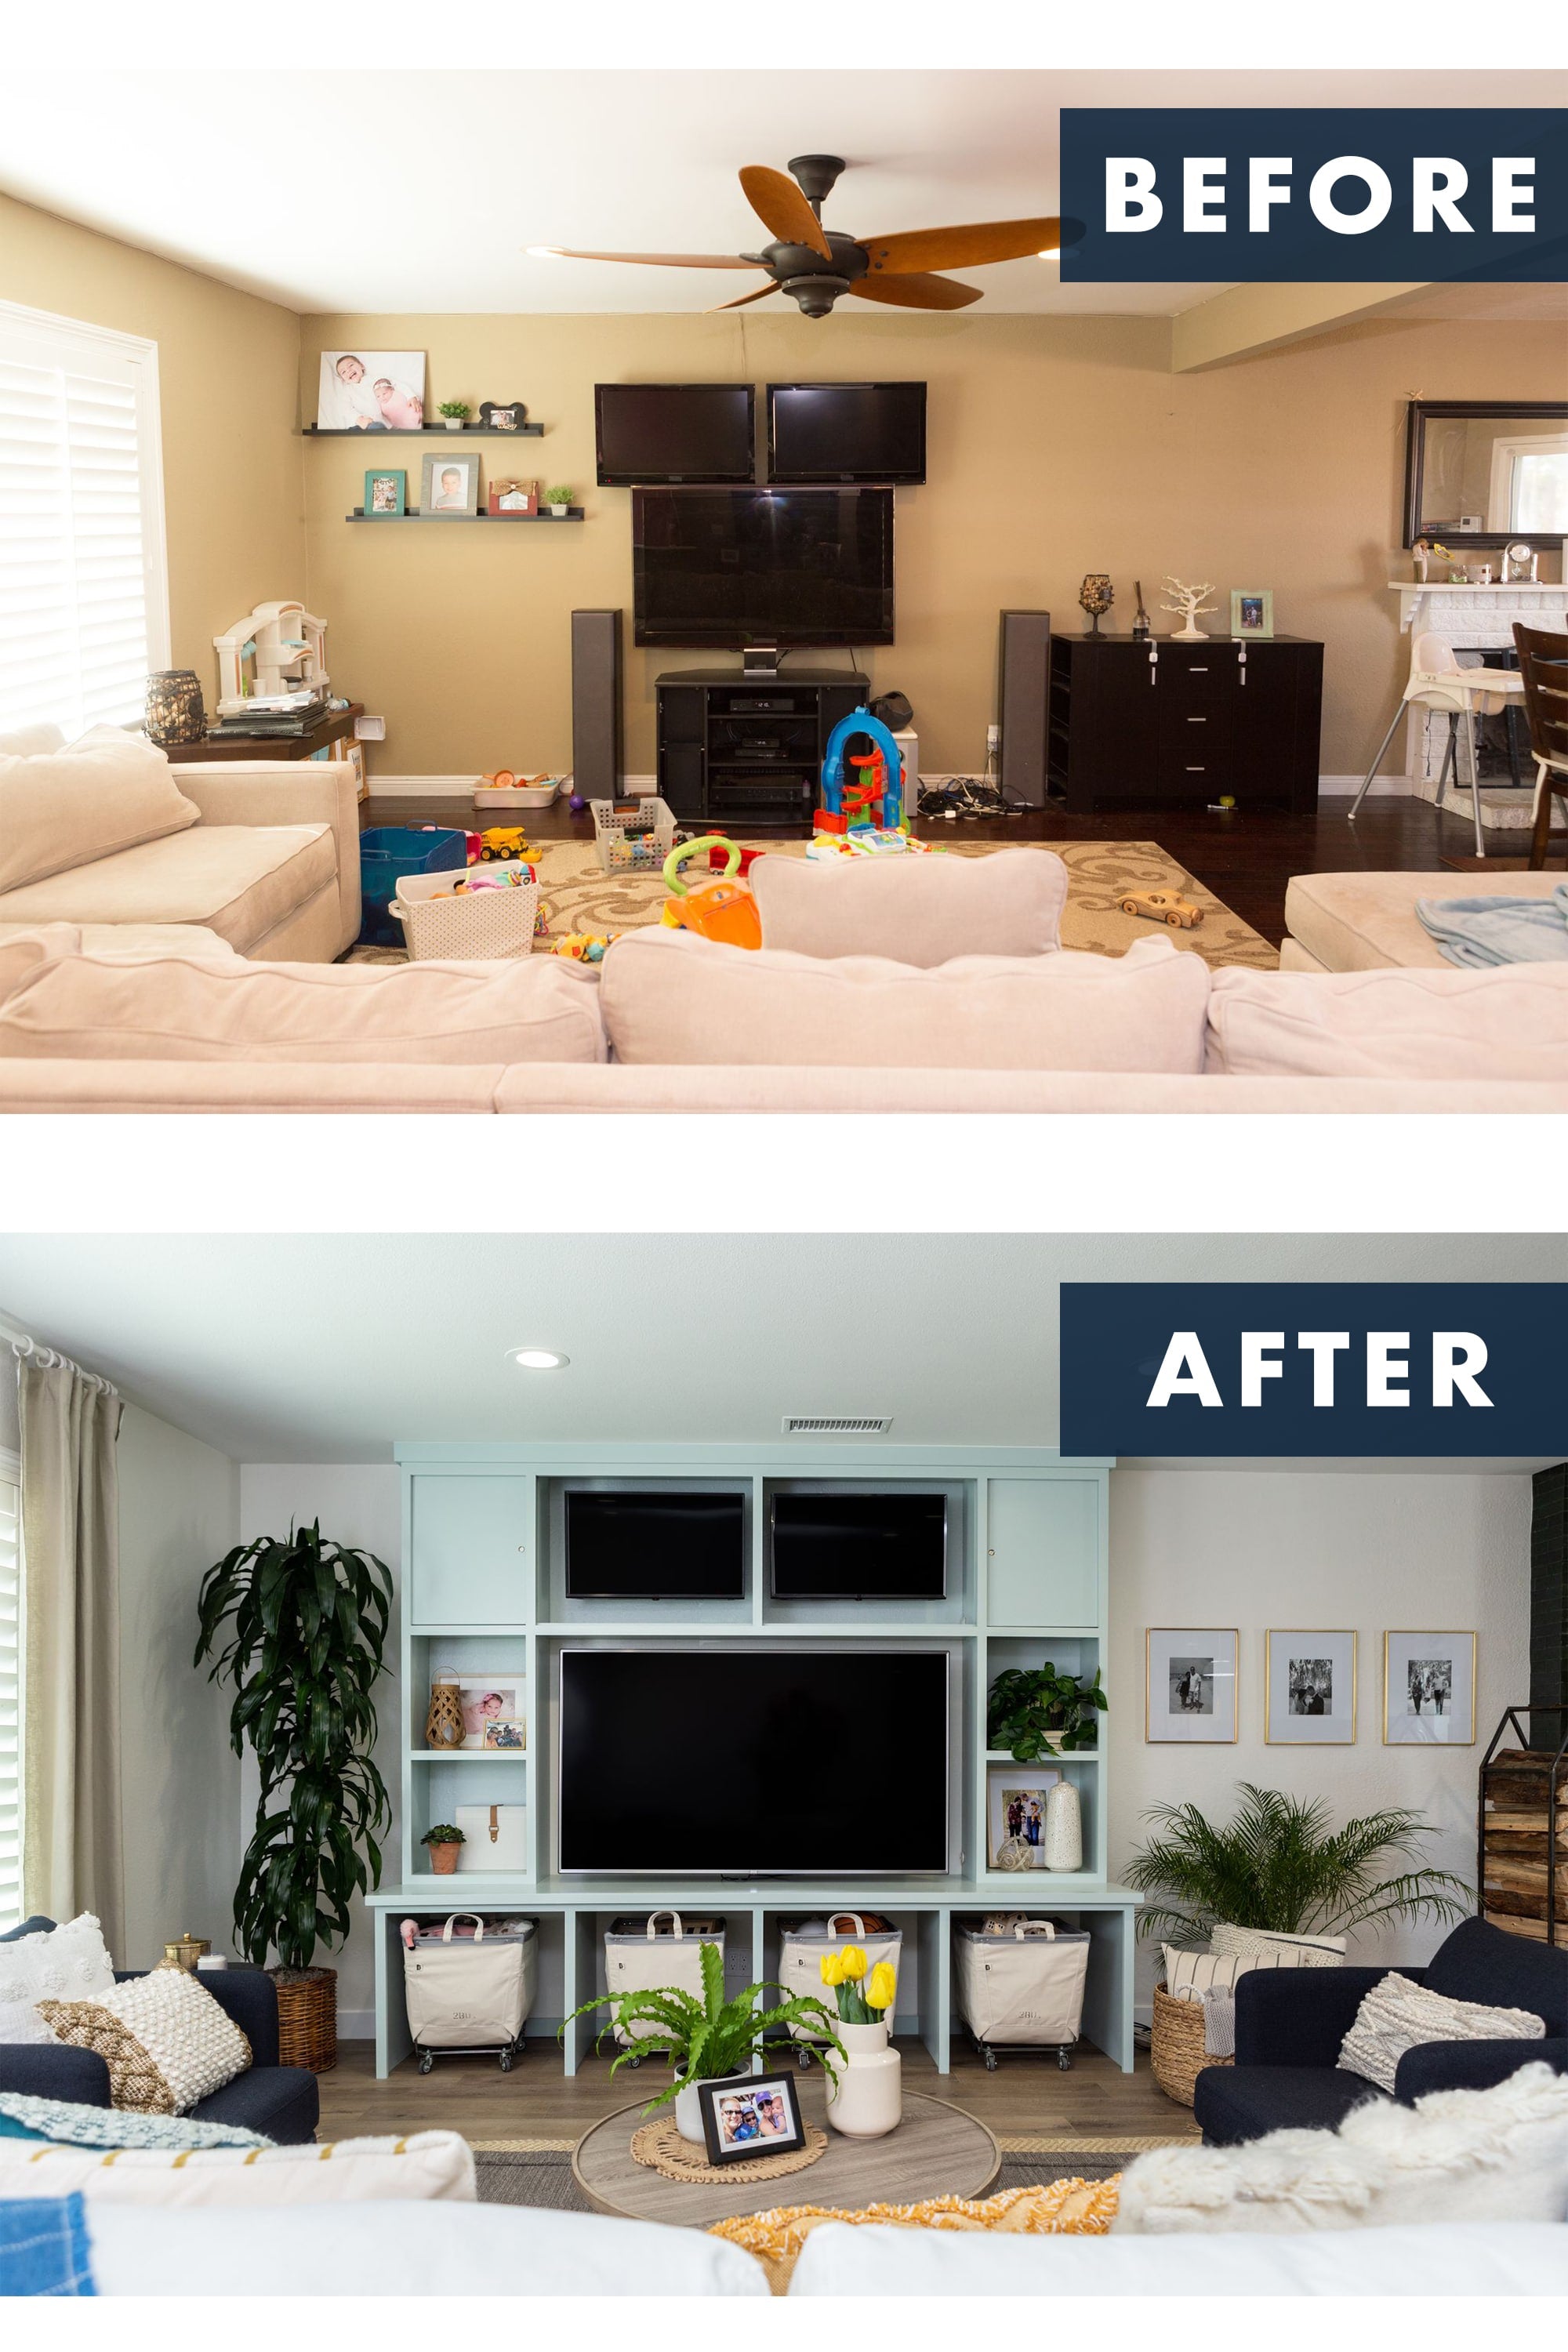 How important is it to start with your WHY for remodeling the living room before you make any purchases or demo anything?